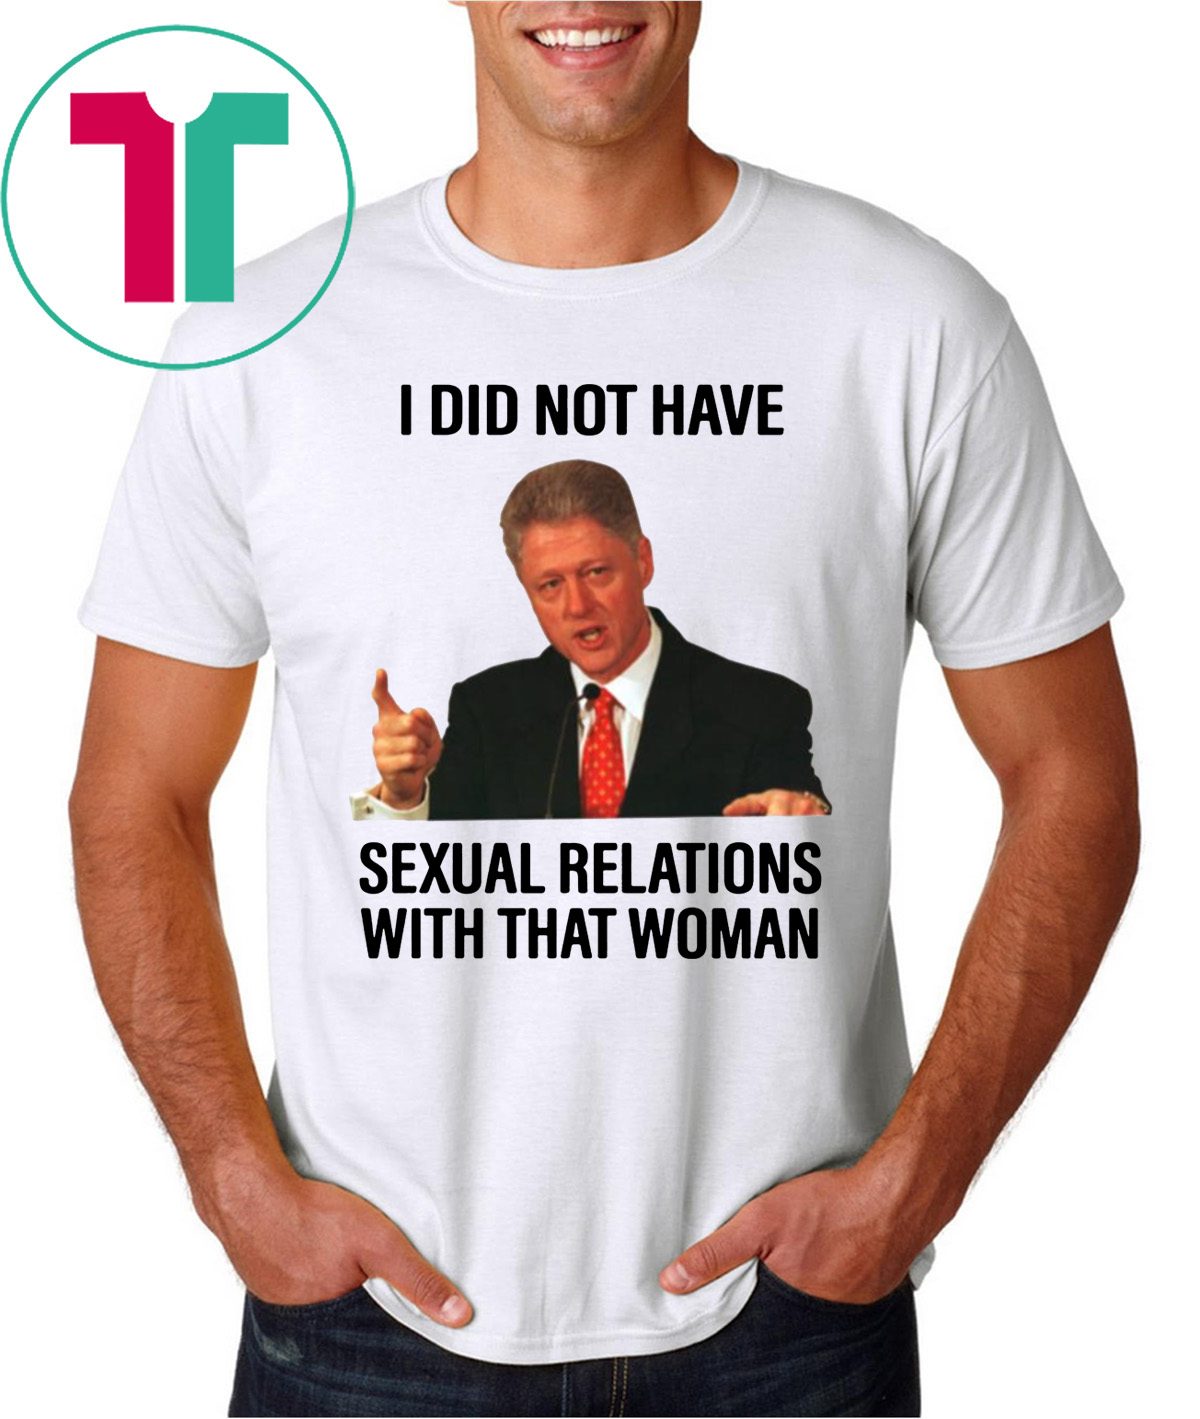 Bill Clinton I Did Not Have Sexual Relations With That Woman Tee Shirt 8359